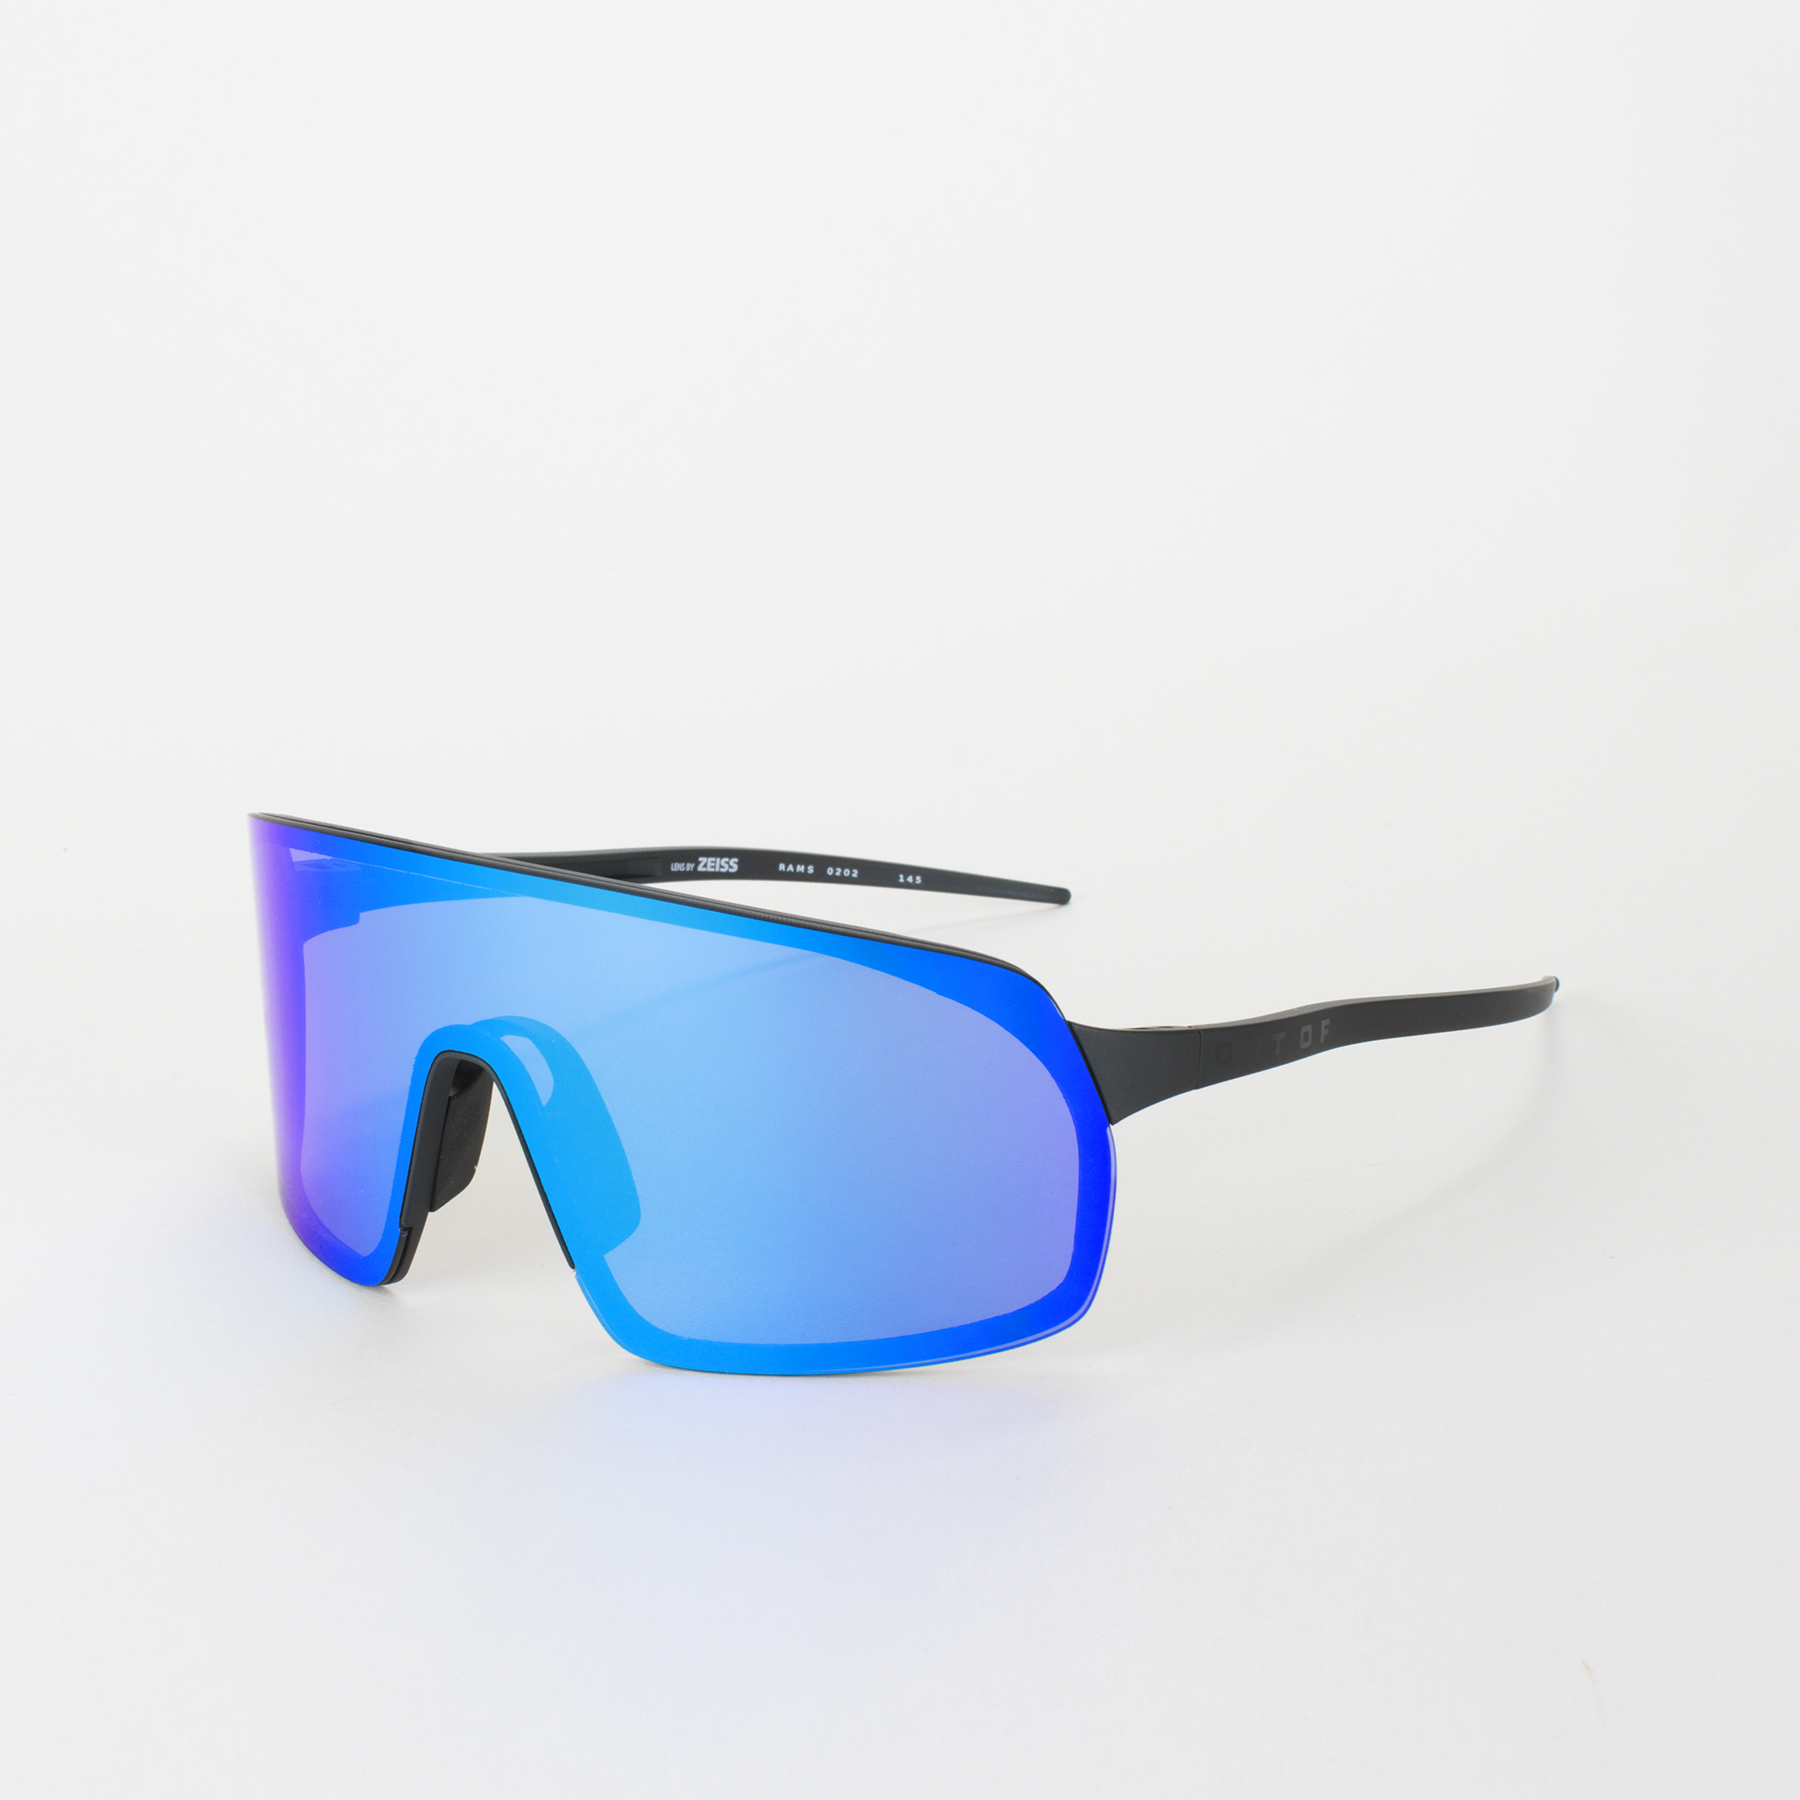 Rams performance sunglasses with Blue MCI lens